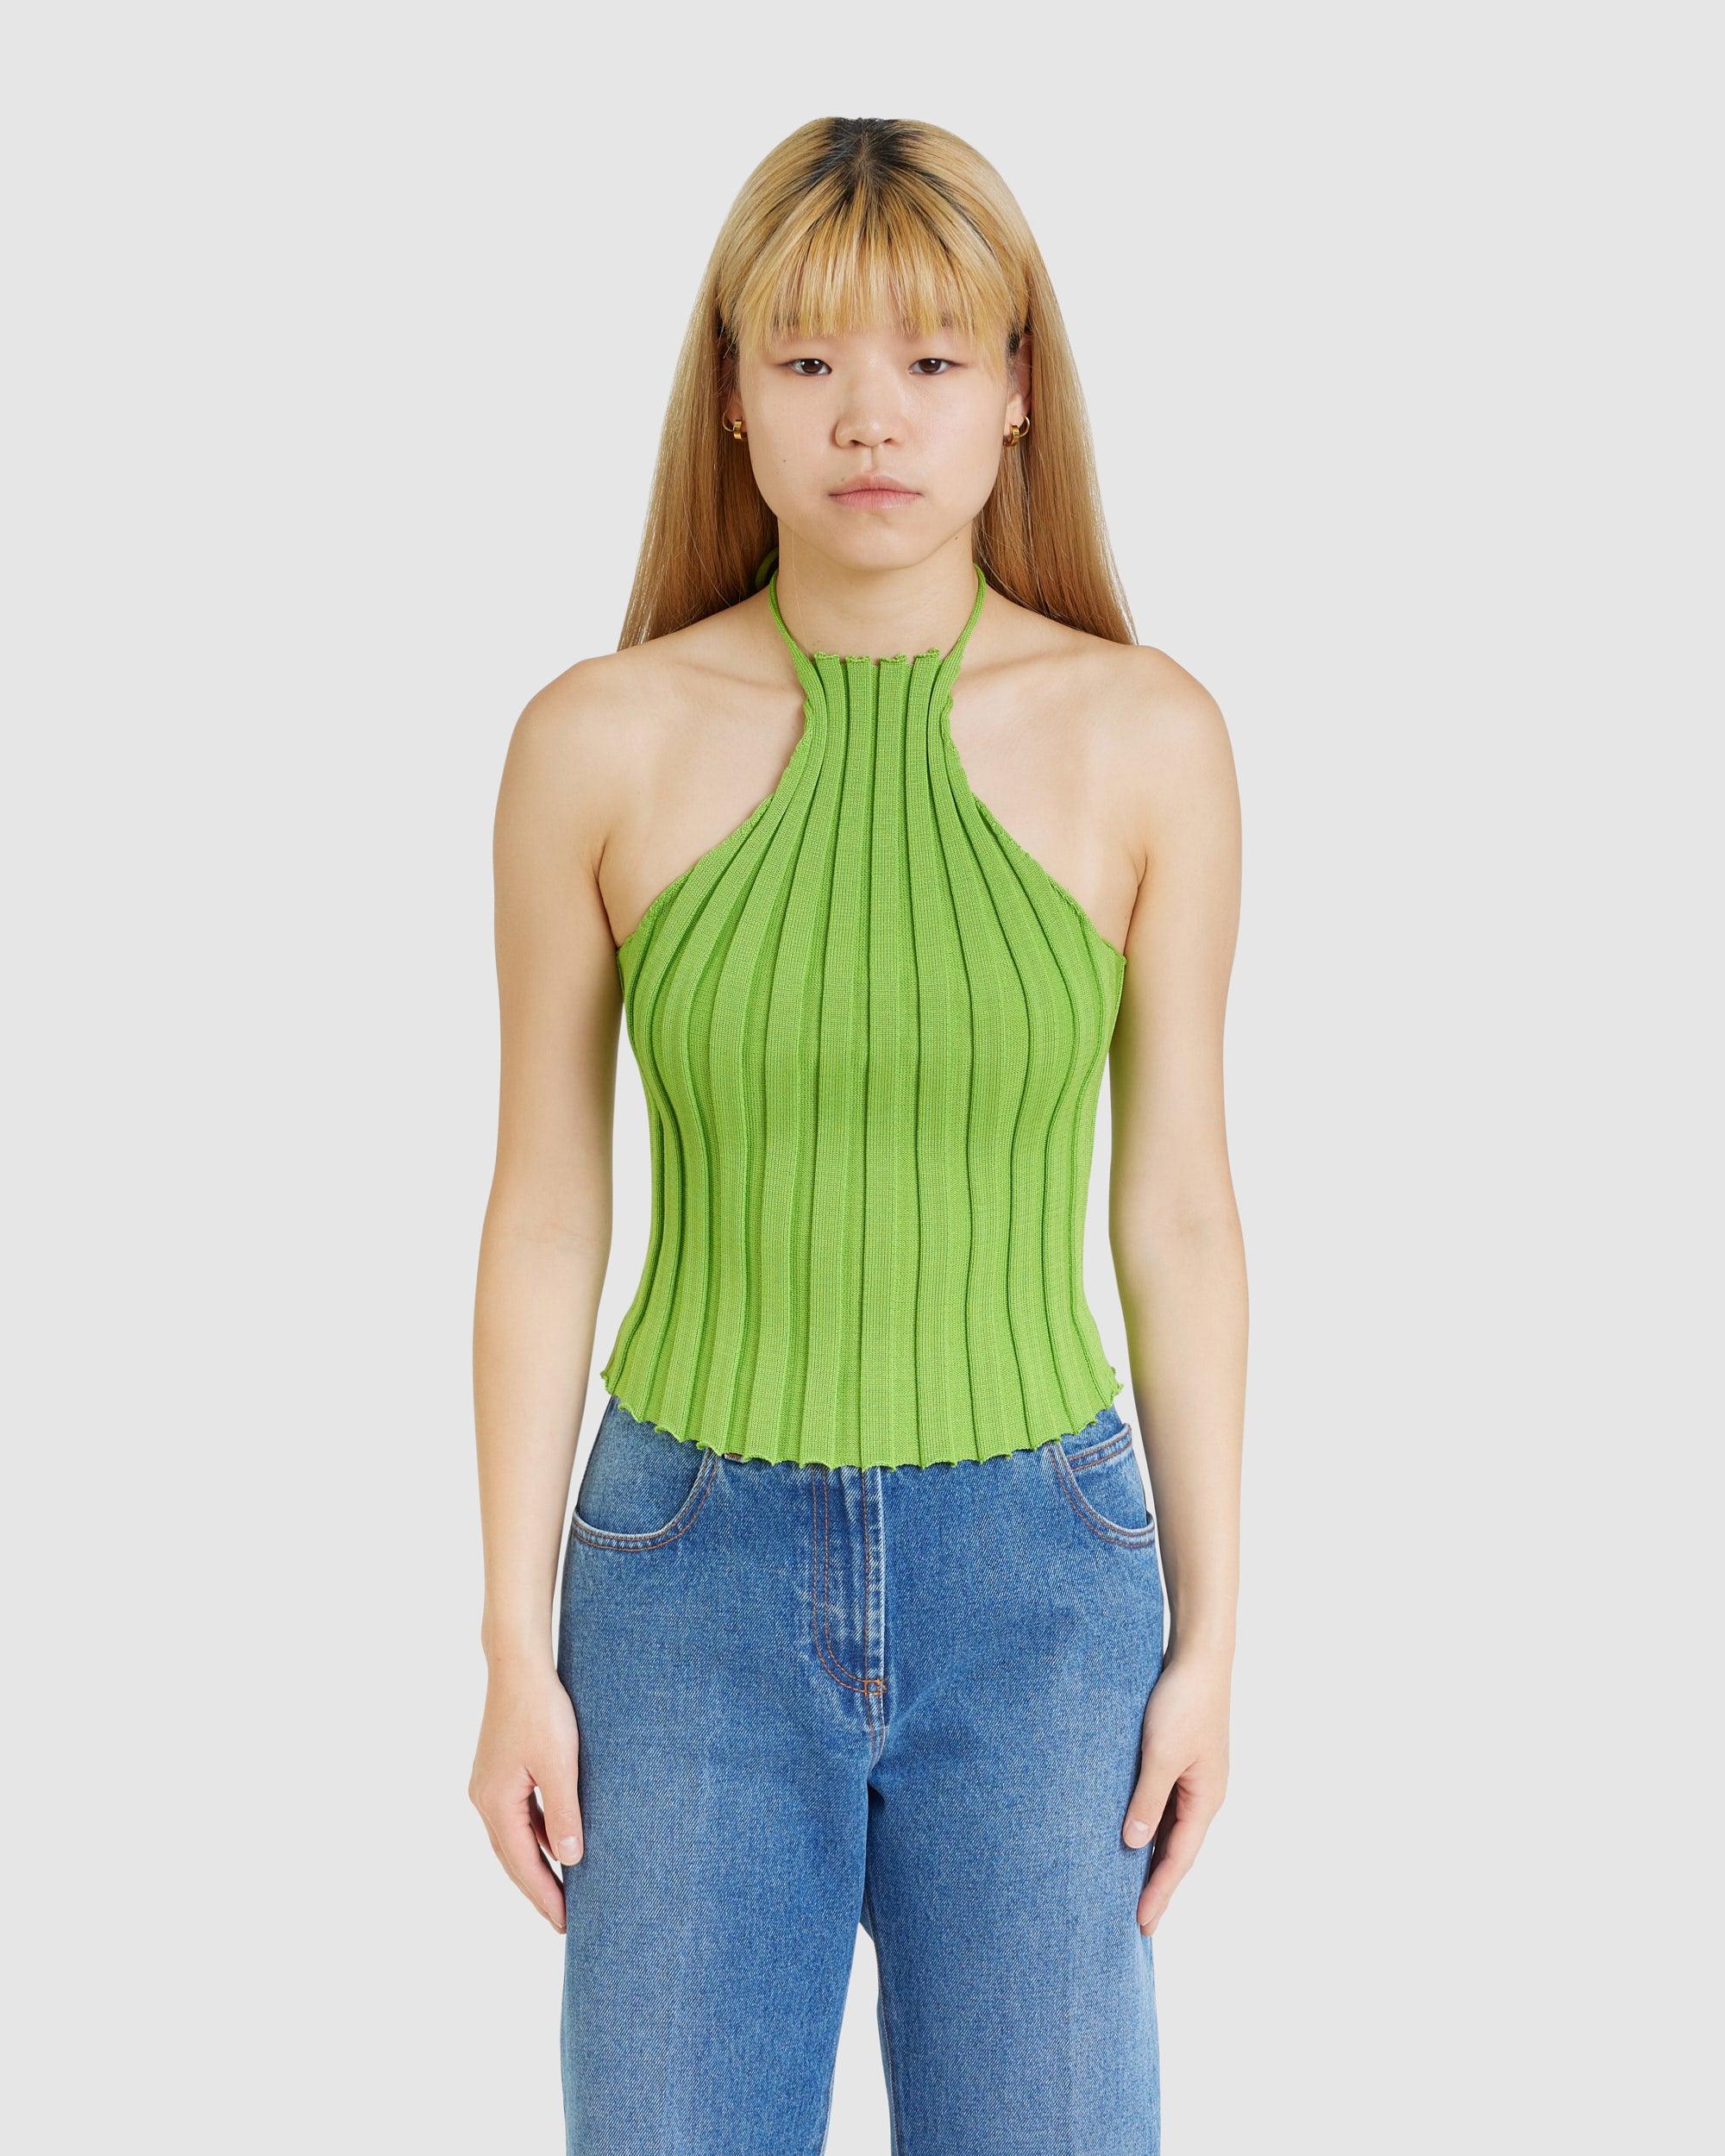 A. ROEGE HOVE Katherine Halterneck Top Apple Green – Chinatown